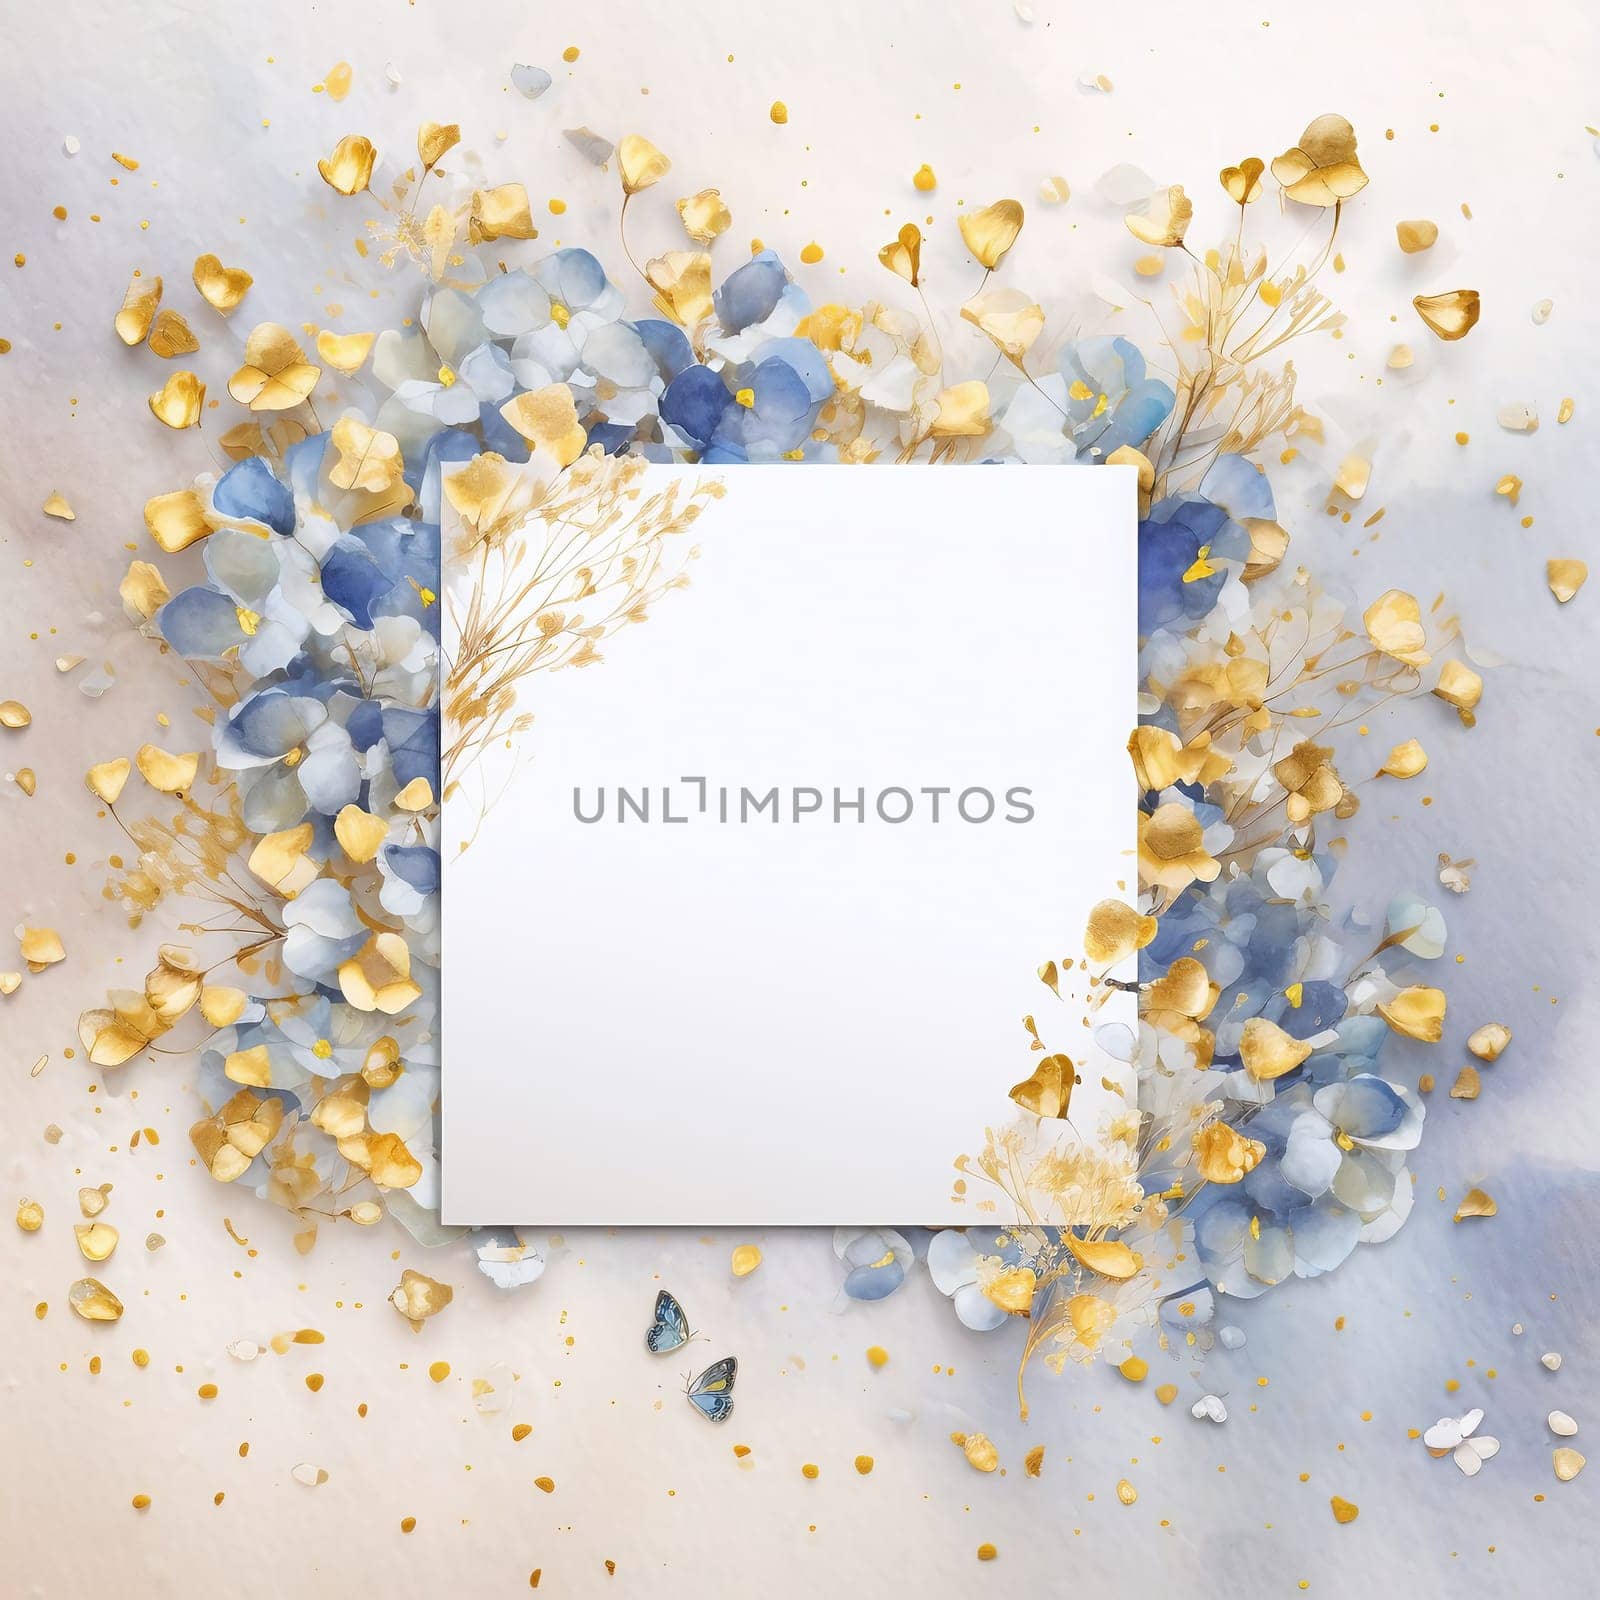 White blank with space for your own content, around decorations of white, blue and gold flowers with confetti. by ThemesS